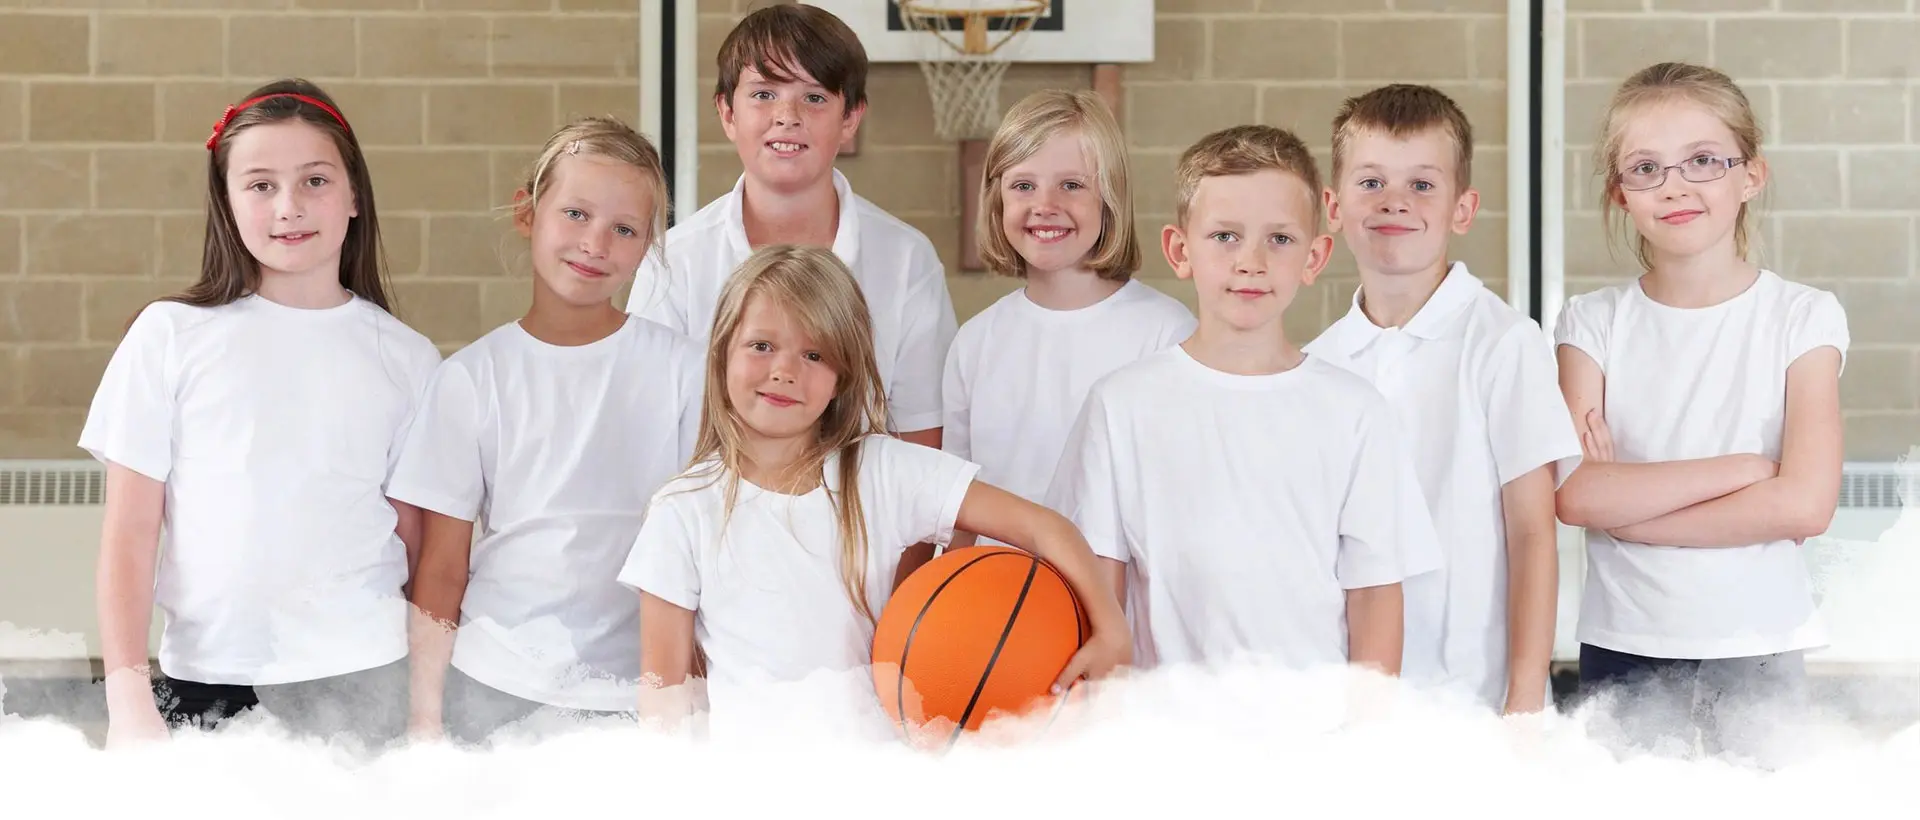 Children Are in White Clothes With Ball